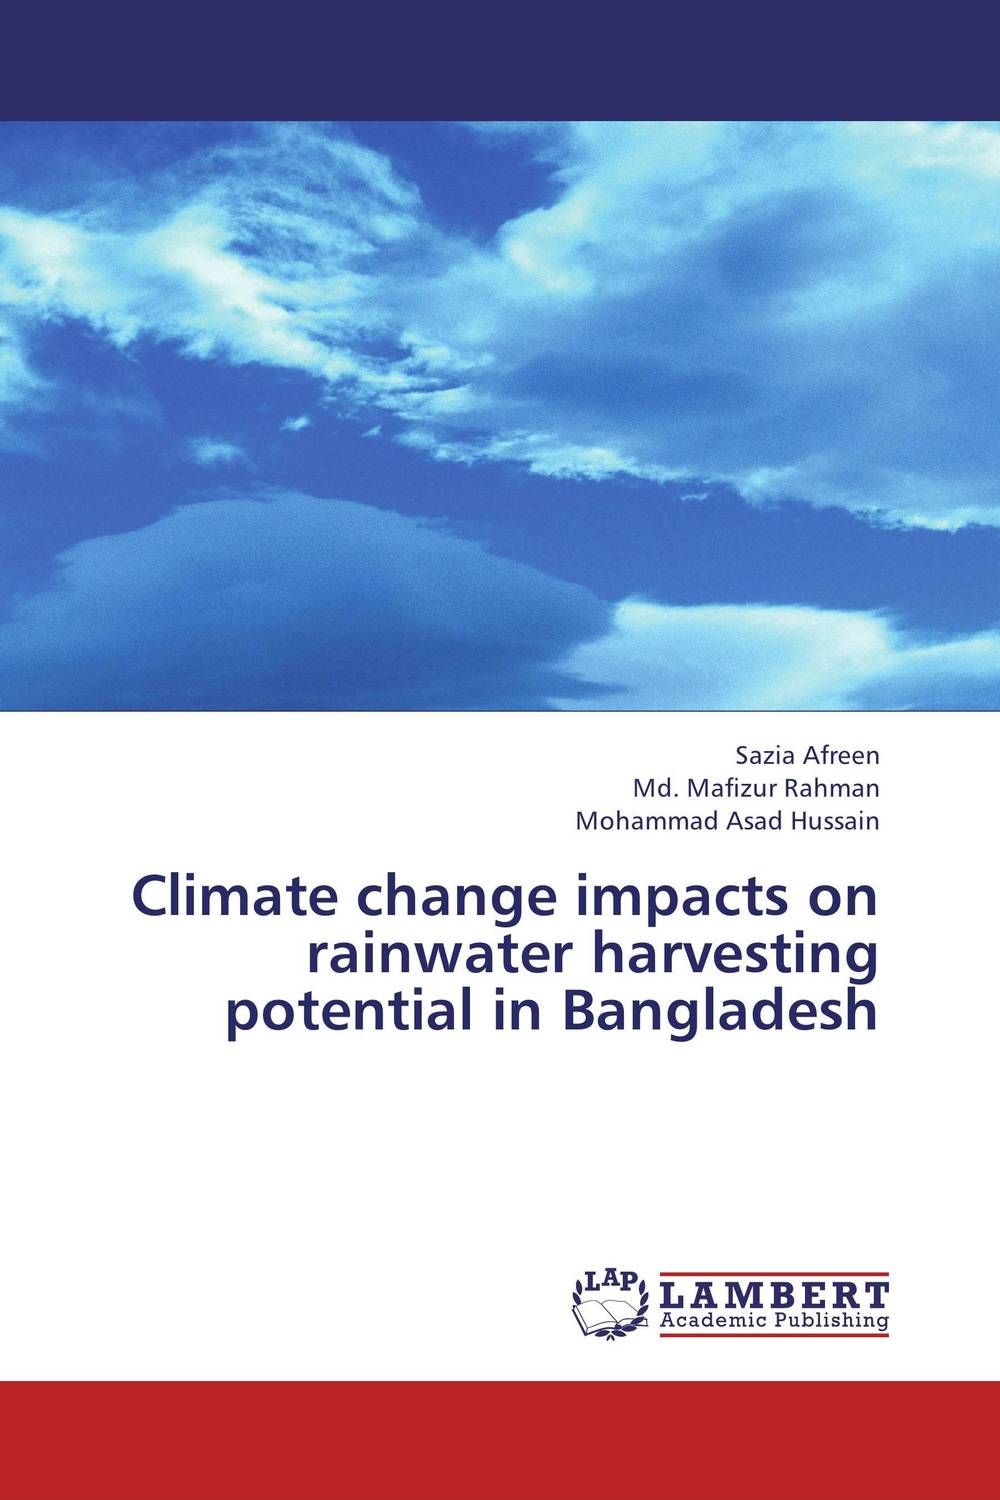 Climate change impacts on rainwater harvesting potential in Bangladesh